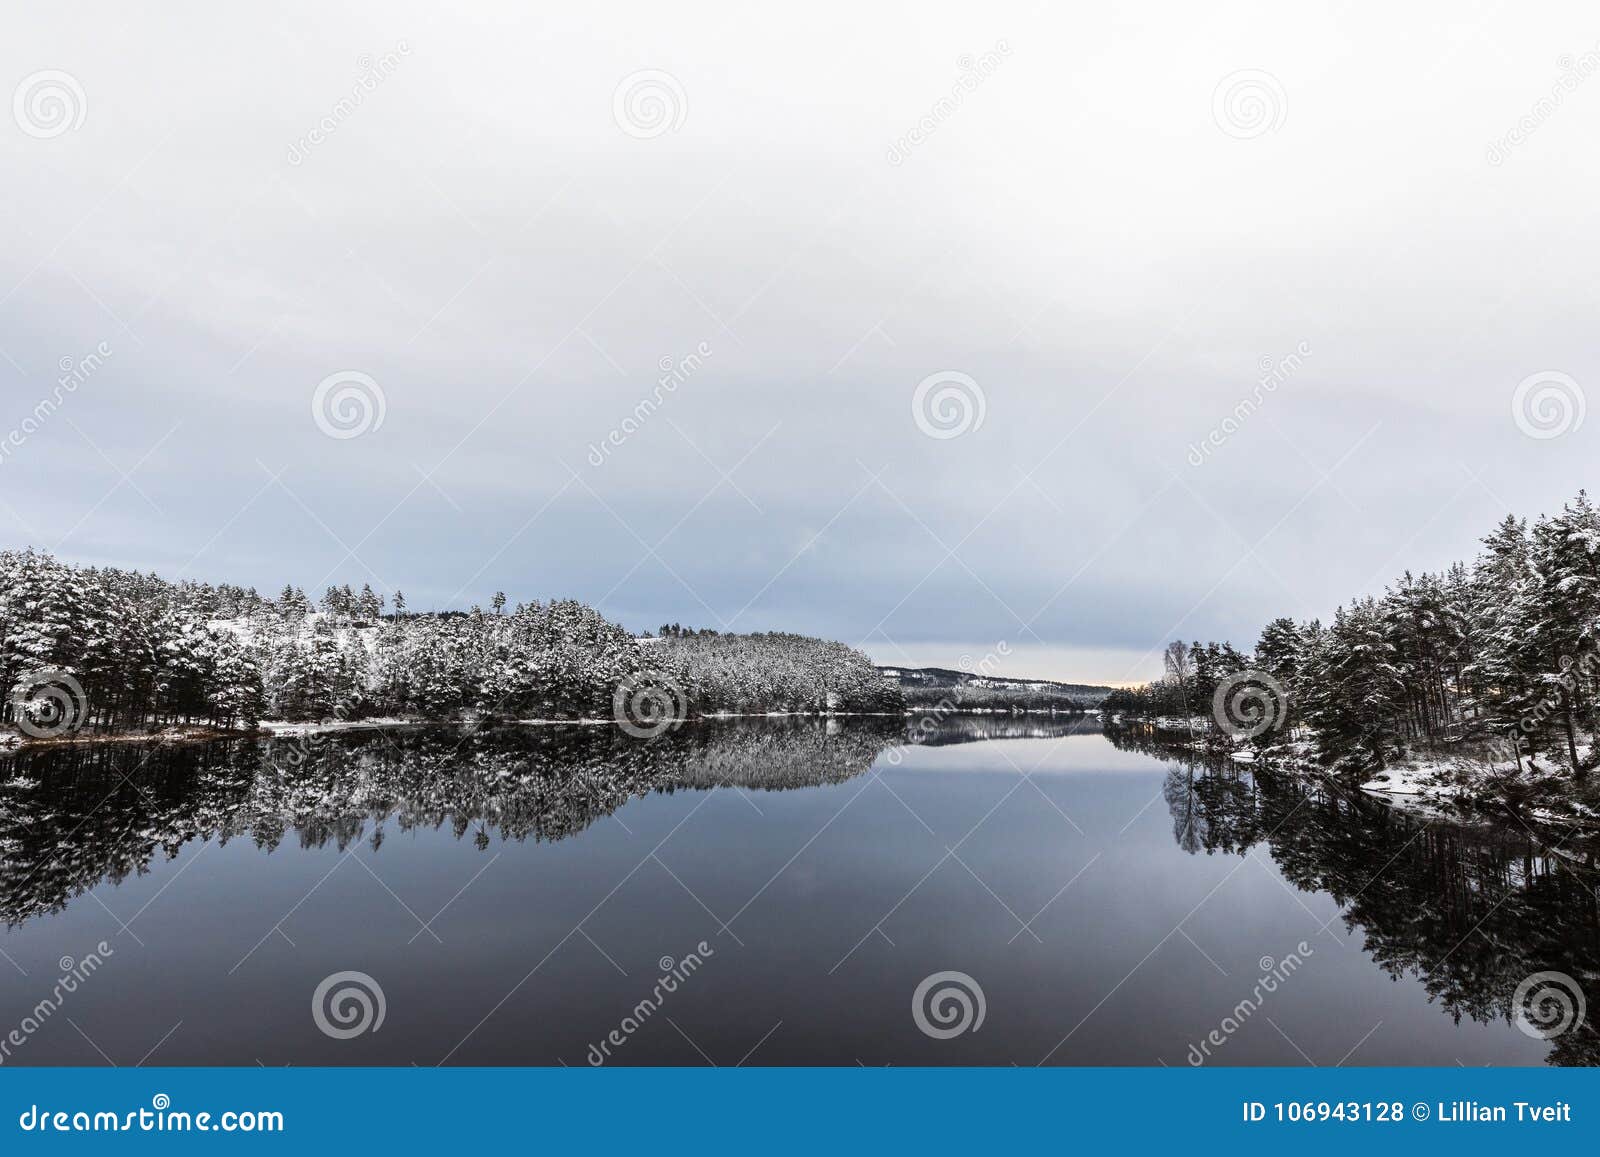 winter landscape, open water in the otra river, south part of norway